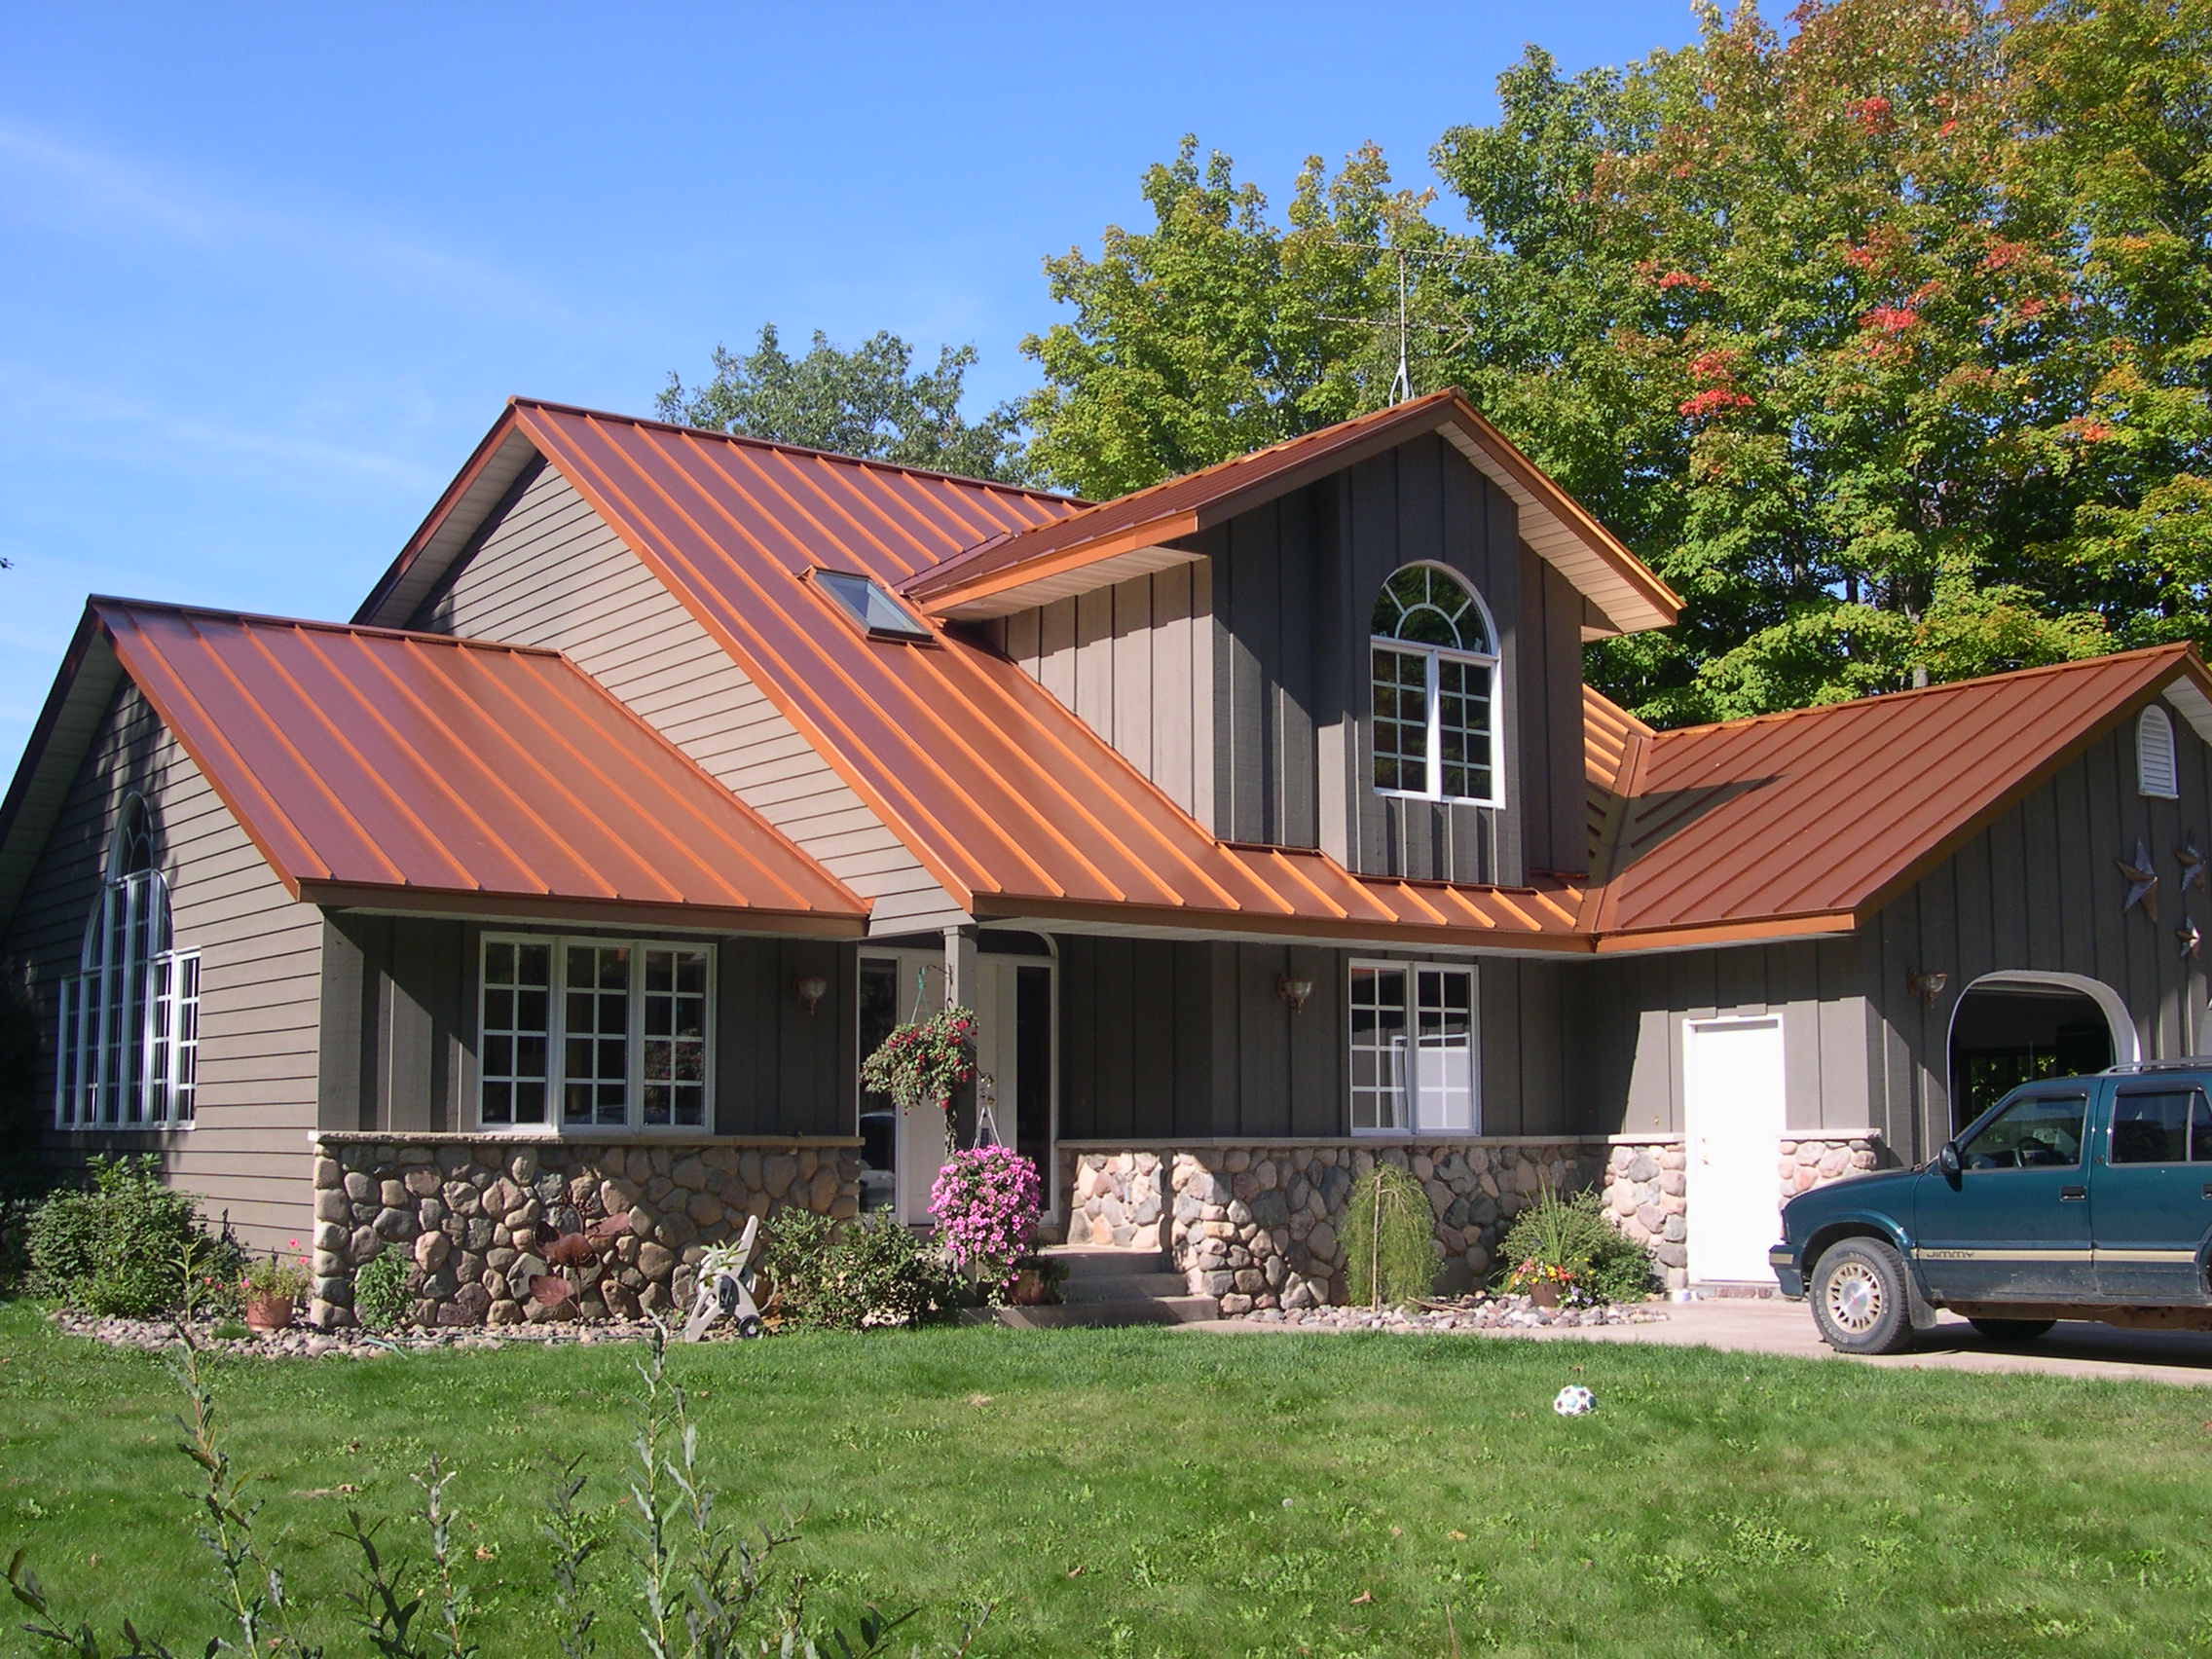 Copper Penny Home - Coated Metals Group